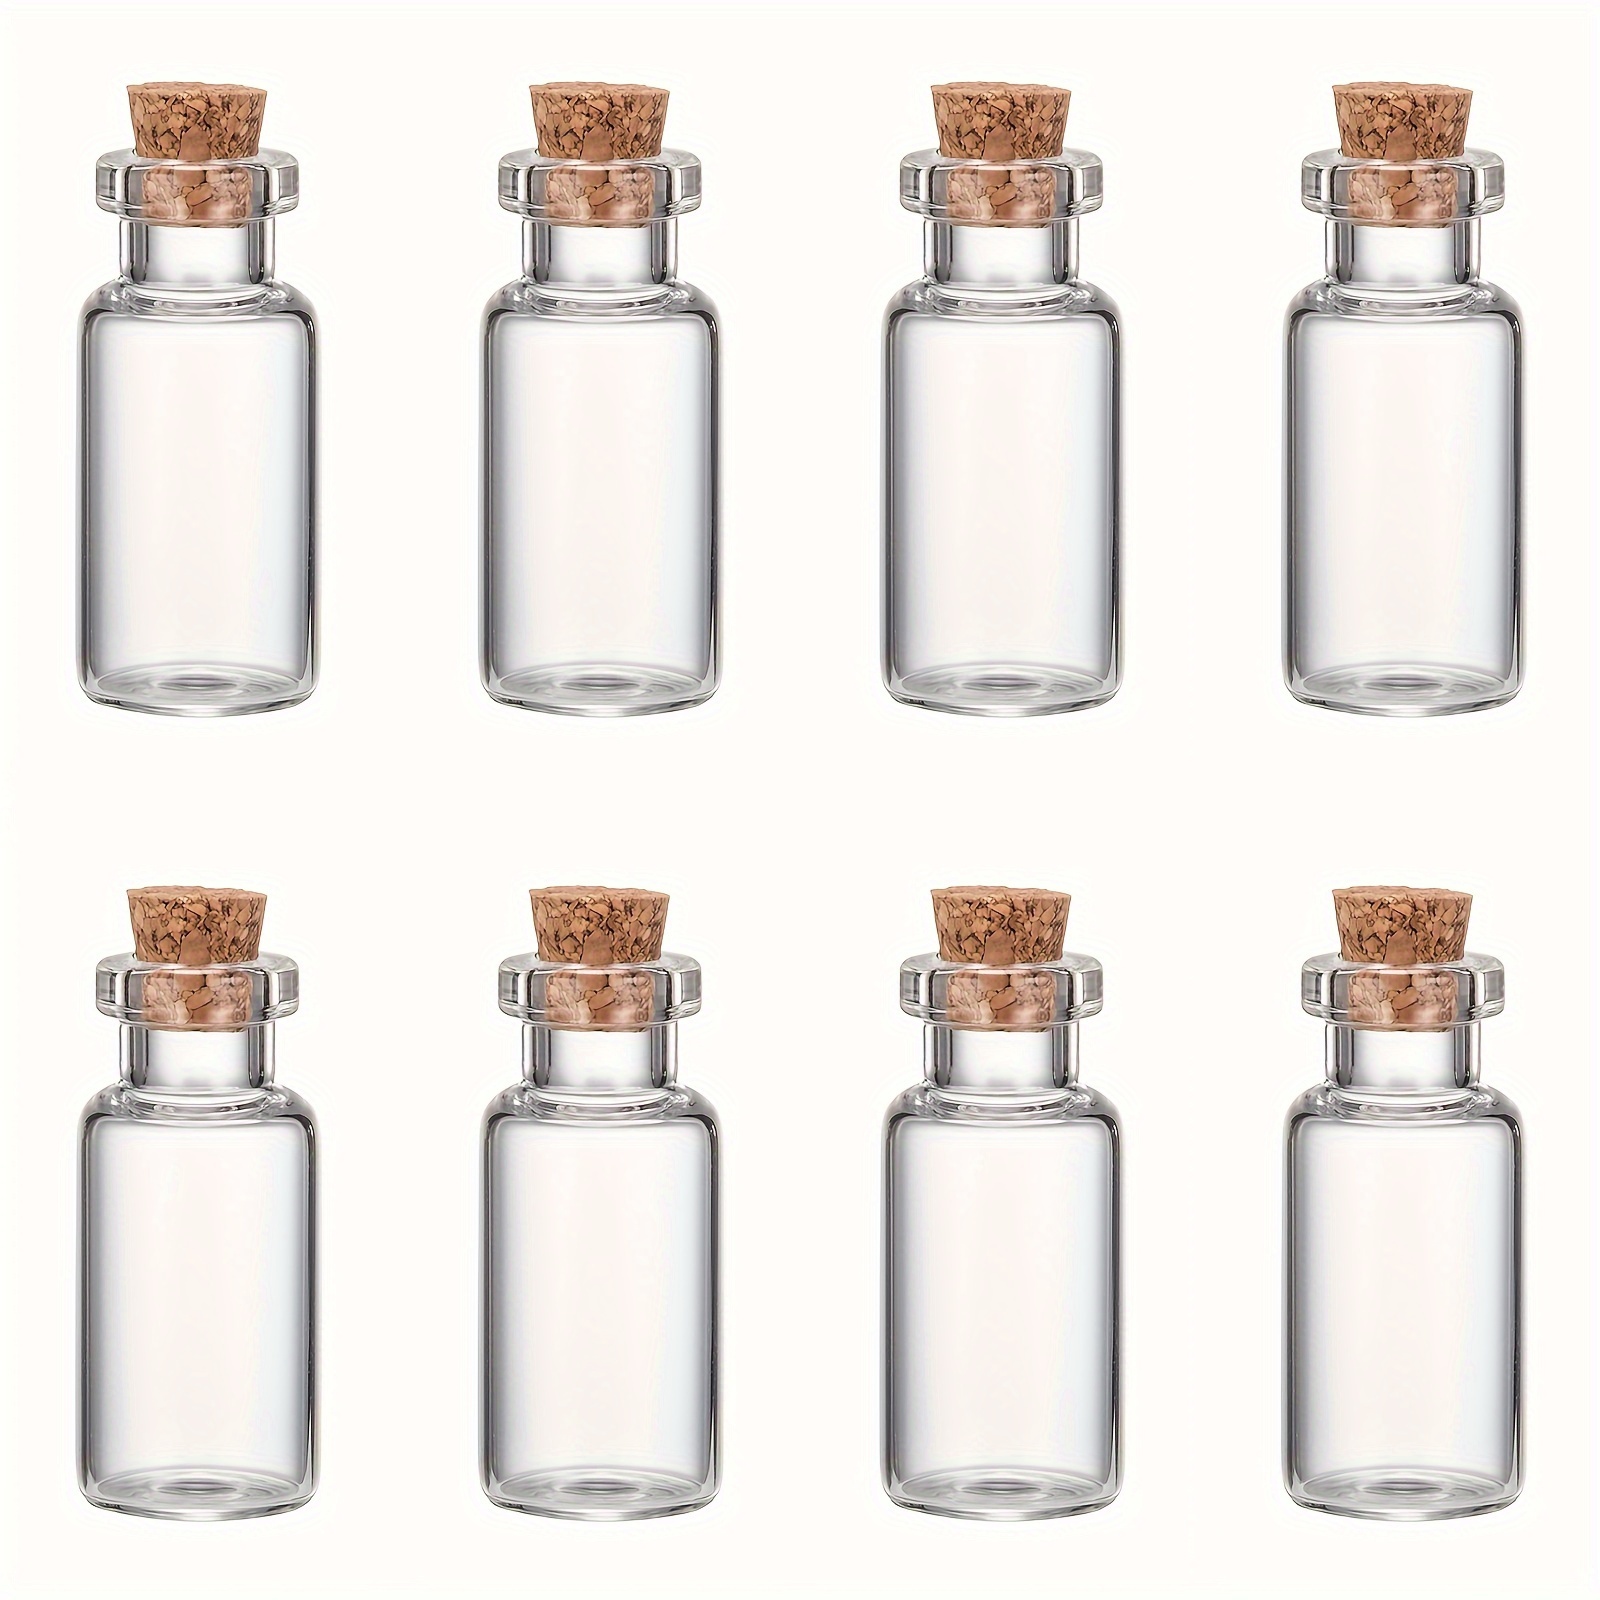 

20pcs Glass Jar With Cork Stopper Wishing Bottles Clear Bead Containers Mini For Necklace Bracelet Pendants Arts Crafts Decorations Party Favors Exquisite Accessories